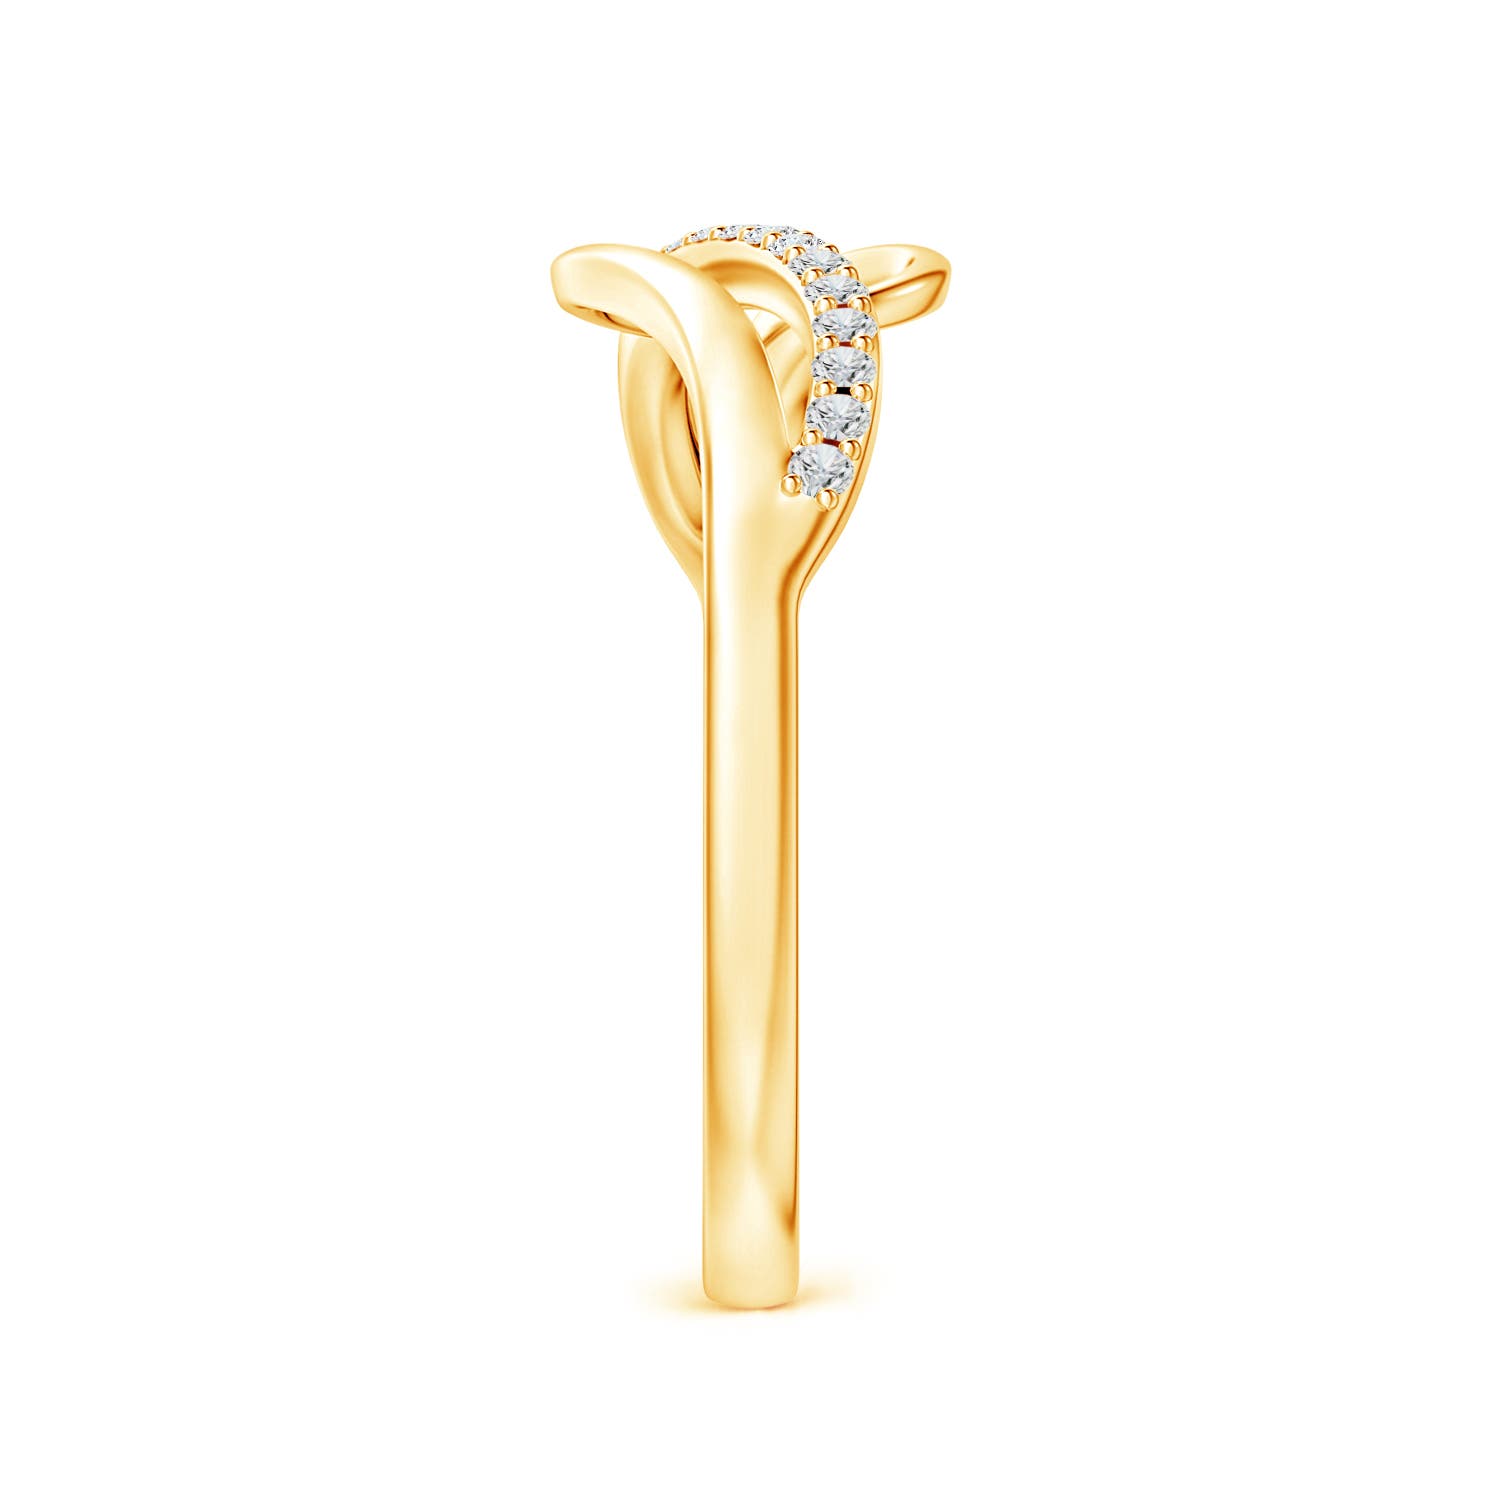 H, SI2 / 0.09 CT / 14 KT Yellow Gold